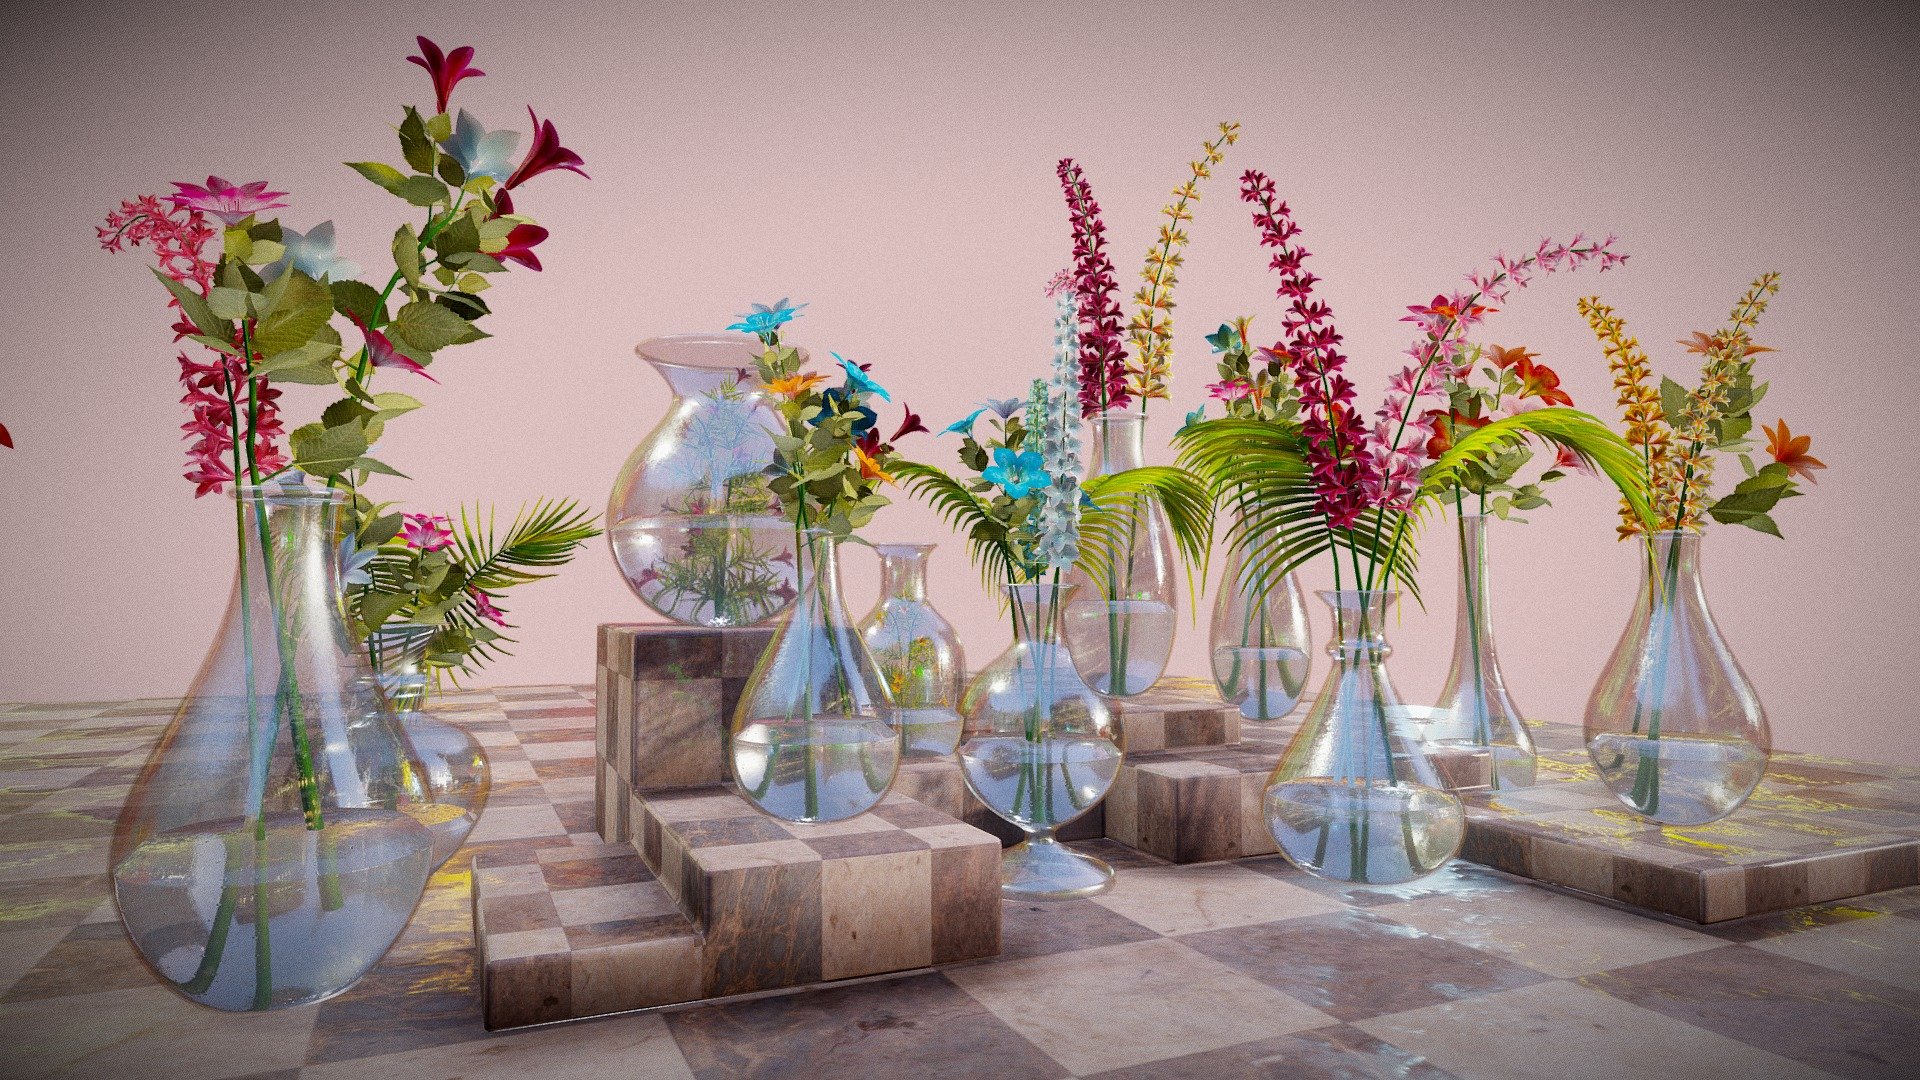 Glass Flower Vase
All the files and textures included in the additional files.



Asset Pack Description:-

9 Types of Vase with water Mesh
8 types of Flower mesh with color variations(Use Color texture variation in material Id)
All Vase Mesh use one Texture set and water mesh use another one
fbx file included



Additional Files Structure

Export Folder contain all the fbx model
Texture folder contain all the Textures
Vase with Flower Blend File



Texture Types Included:-

Vase Base Color,Normal,Roughness,Opacity,Metallic
Water Base Color,Normal,Roughness,Opacity,Metallic
Wet Floor Base Color,Roughness,Normal
Stem Basecolor,Normal,ROughness
Palm Leaves BaseColor,Normal,Roughness,Opacity
Flower BaseColor,Normal,Roughness(Color Variation Included)


Thank You!
Contact me: nk.vmc.s@gmail.com - Glass Vase With Flowers - Buy Royalty Free 3D model by Nicholas-3D (@Nicholas01) 3d model